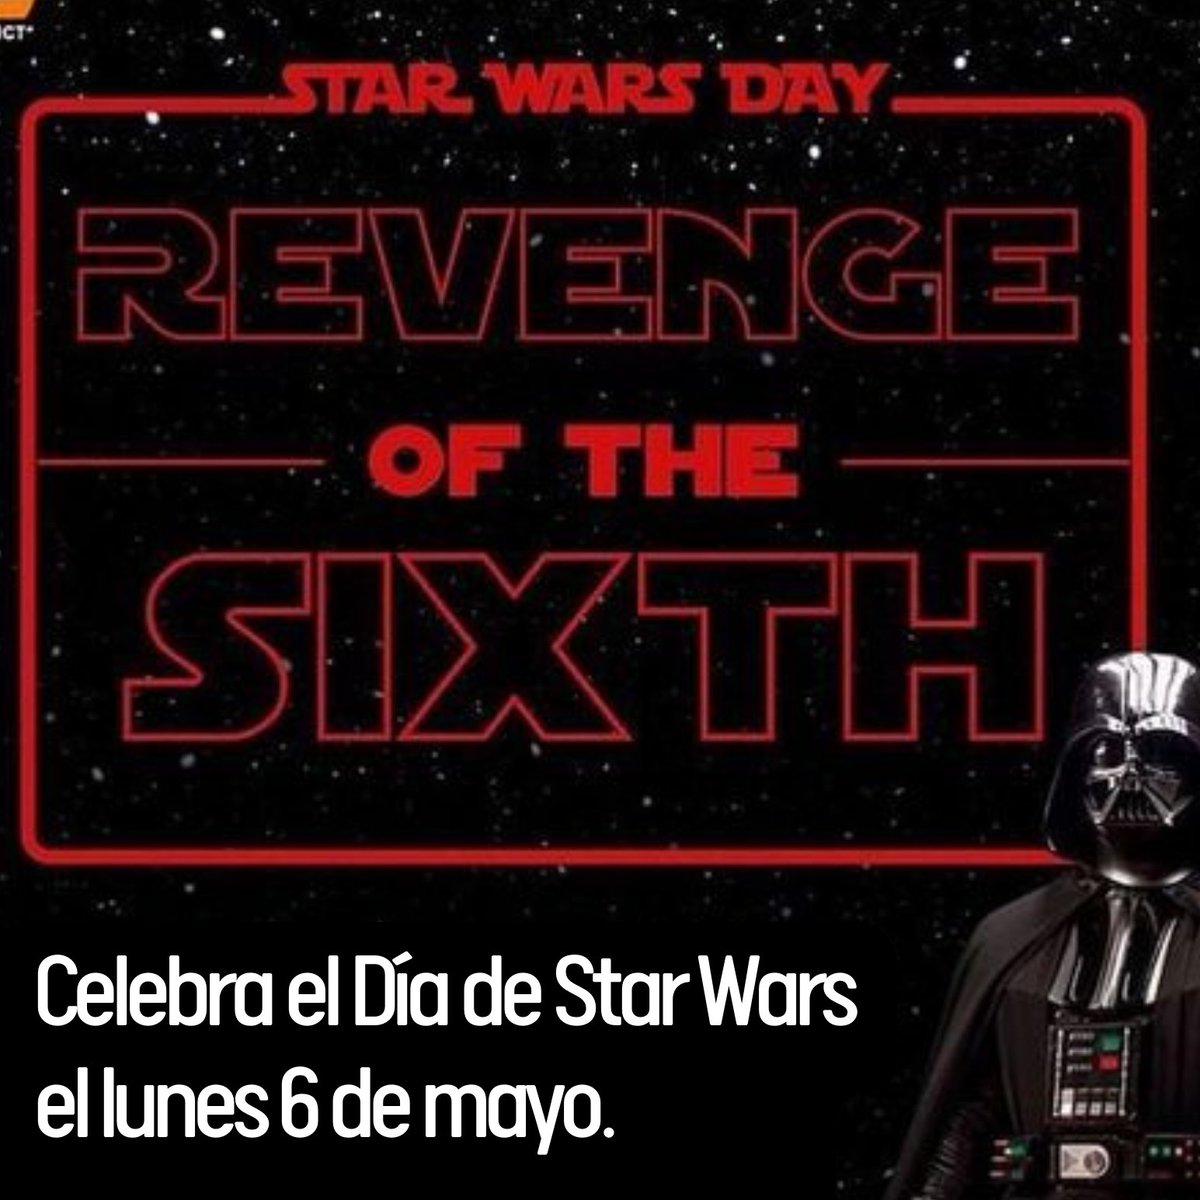 Join us in celebrating Star Wars on Monday, May 6th, for 'Revenge of the Sixth!' Dress up as your favorite character or wear Star Wars-themed attire!